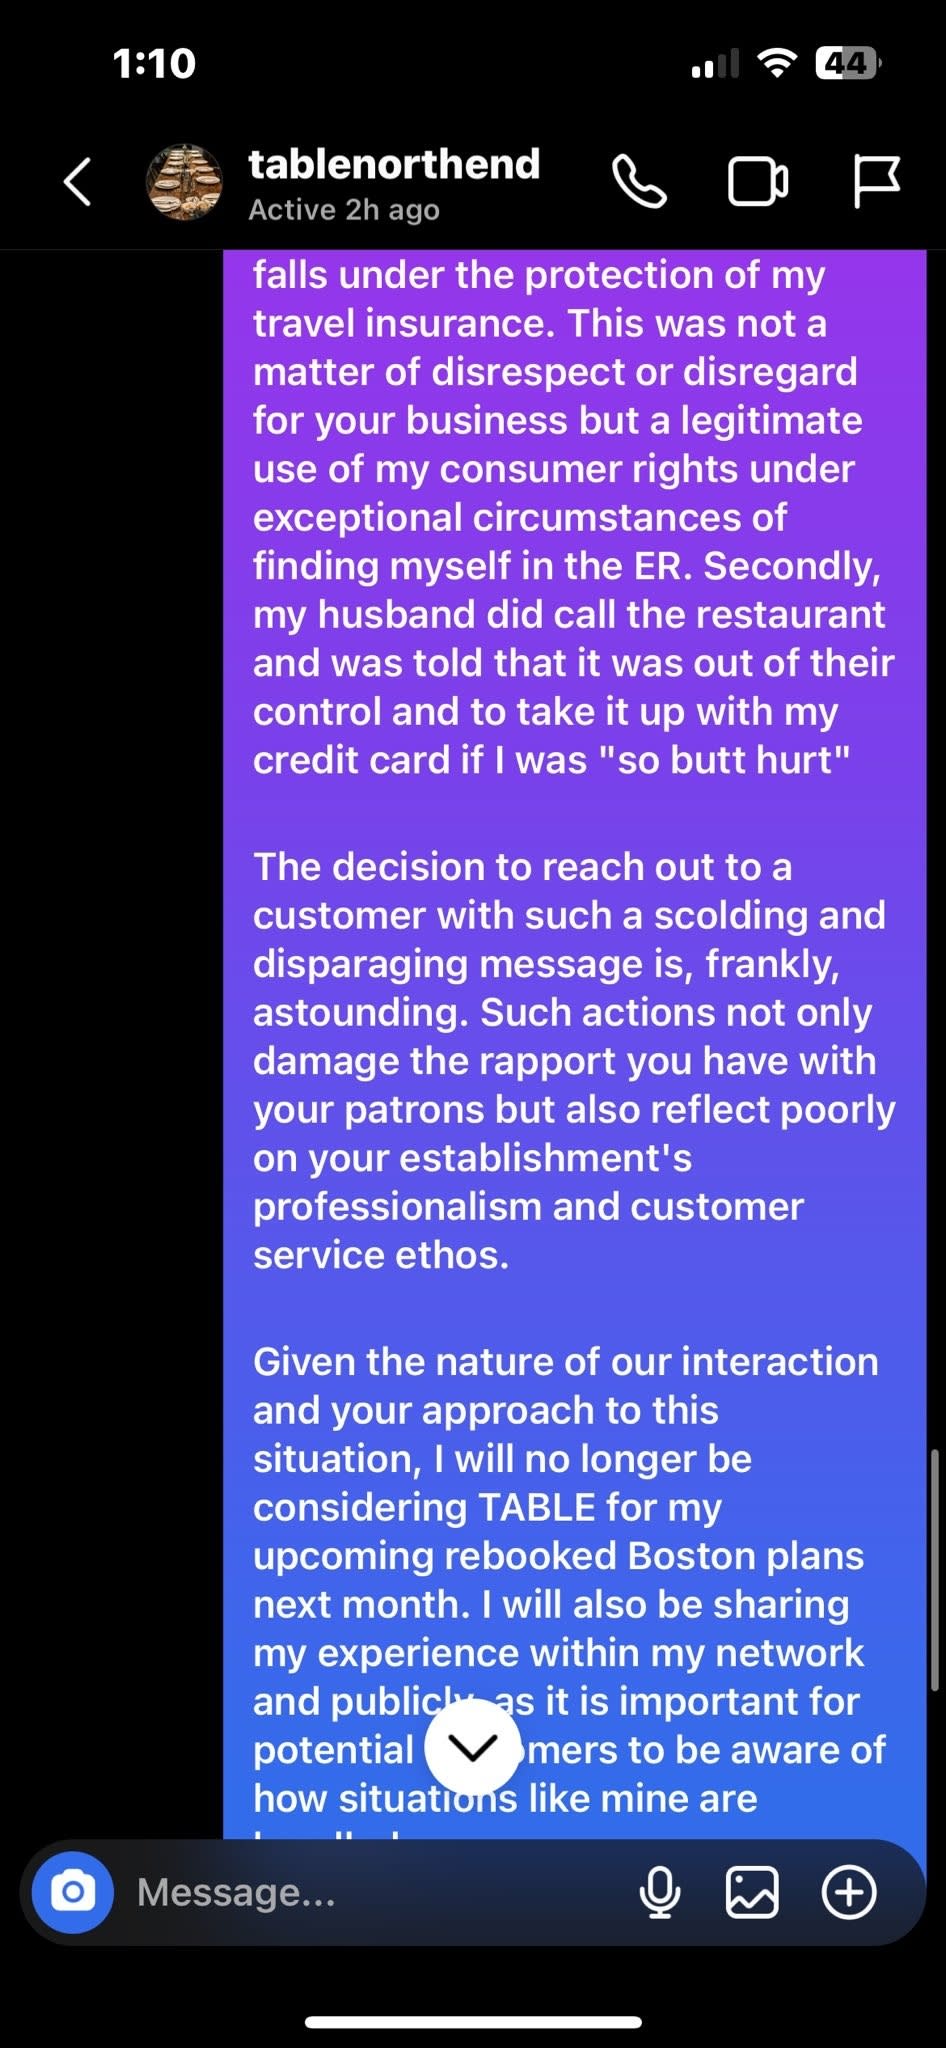 a message from trevor to jen detailing that his husband had called the restaurant